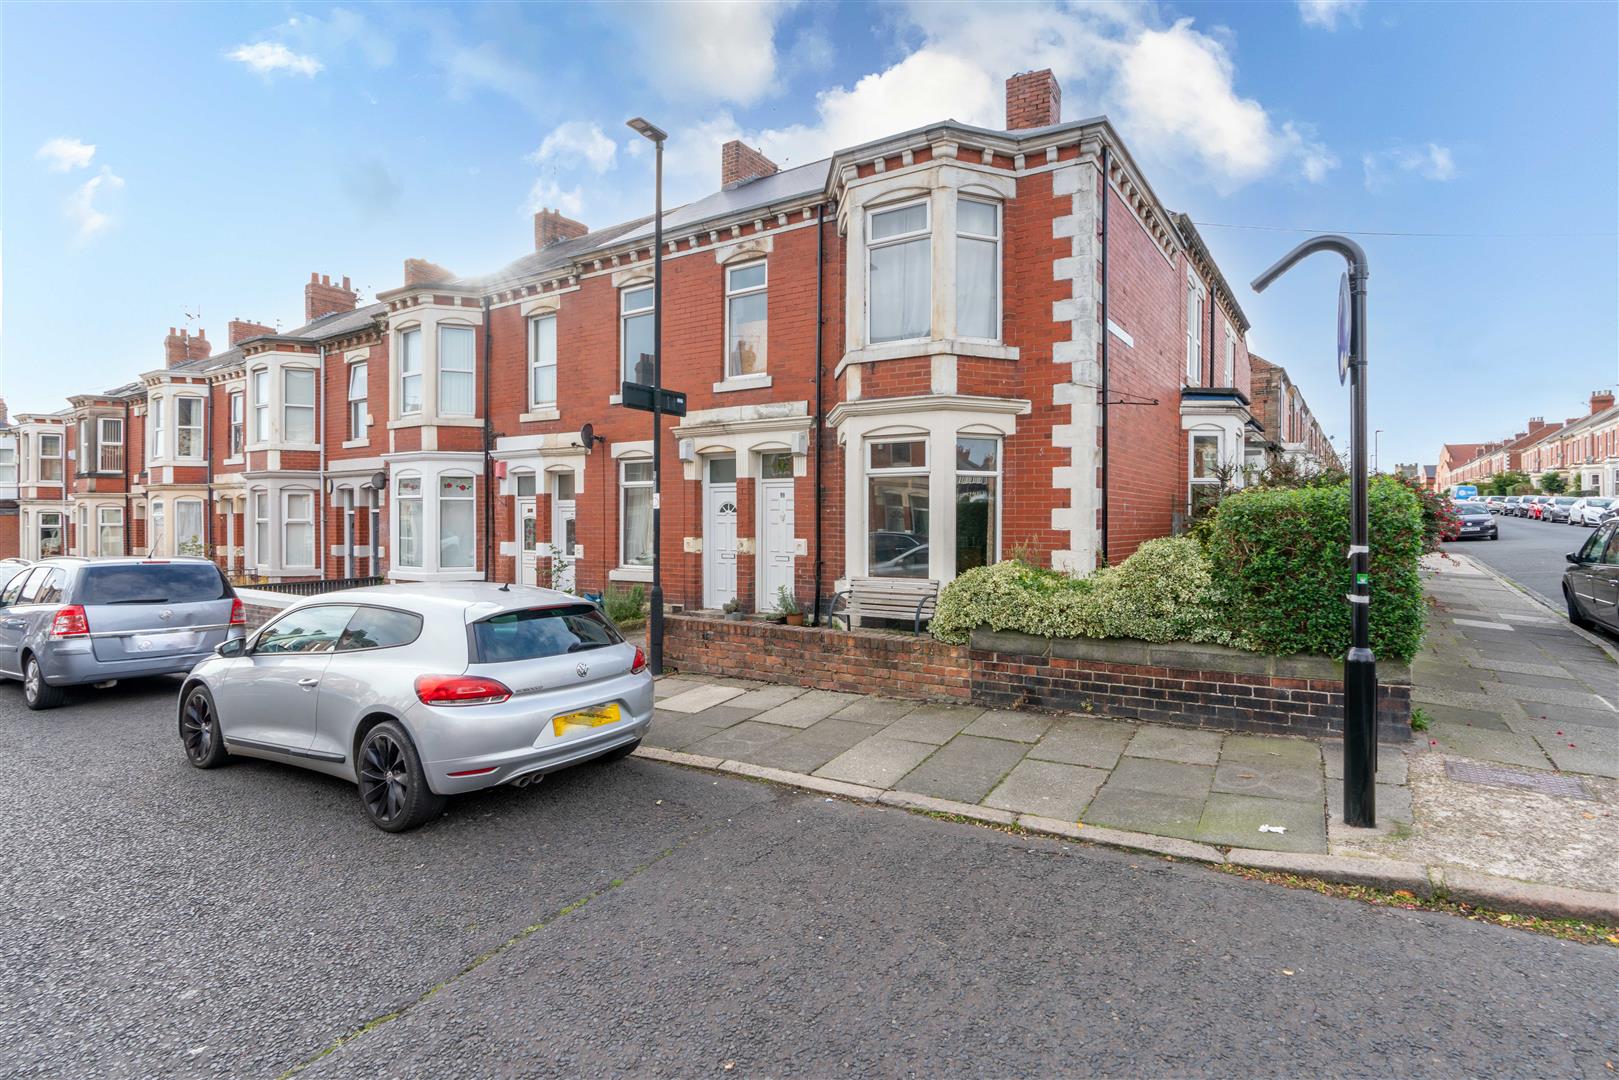 3 bed flat for sale in Addycombe Terrace, Newcastle Upon Tyne - Property Image 1